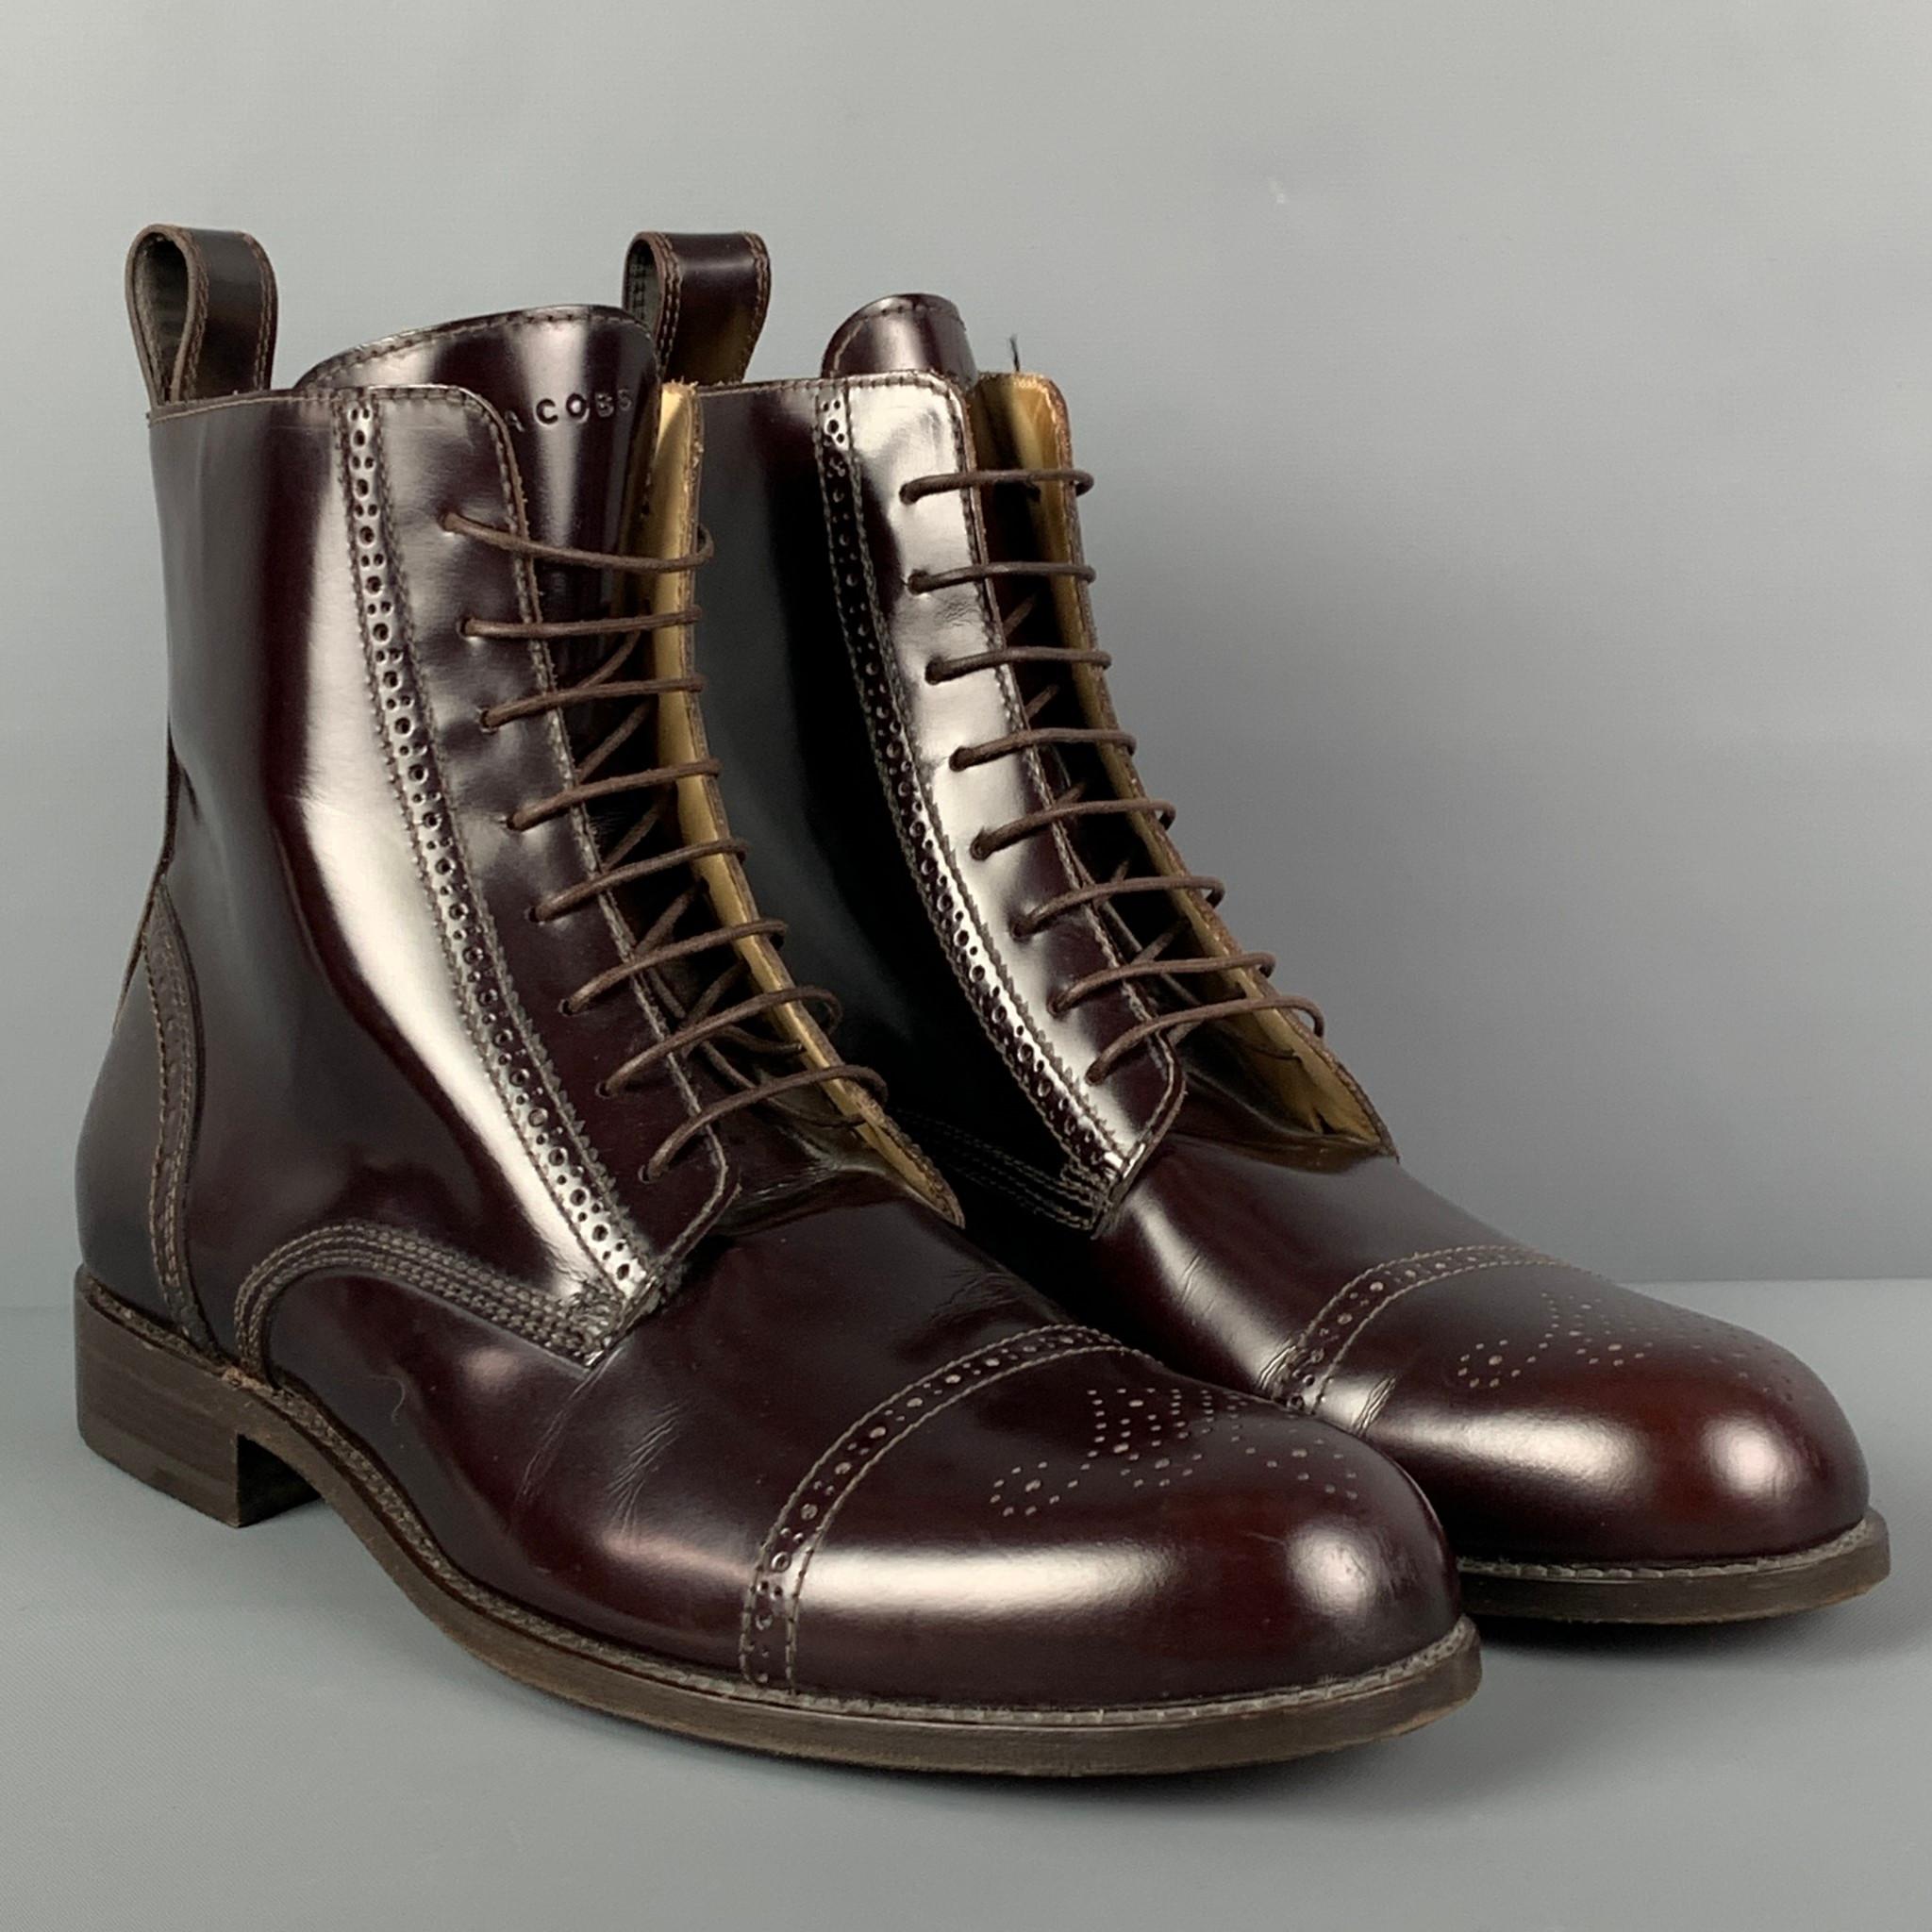 MARC JACOBS ankle boots comes in a burgundy perforated leather featuring a cap toe ad a lace up closure. Handmade in Italy. 

Very Good Pre-Owned Condition.
Marked: 8.5

Measurements:

Length: 12 in.
Width: 4 in.
Height: 6 in. 